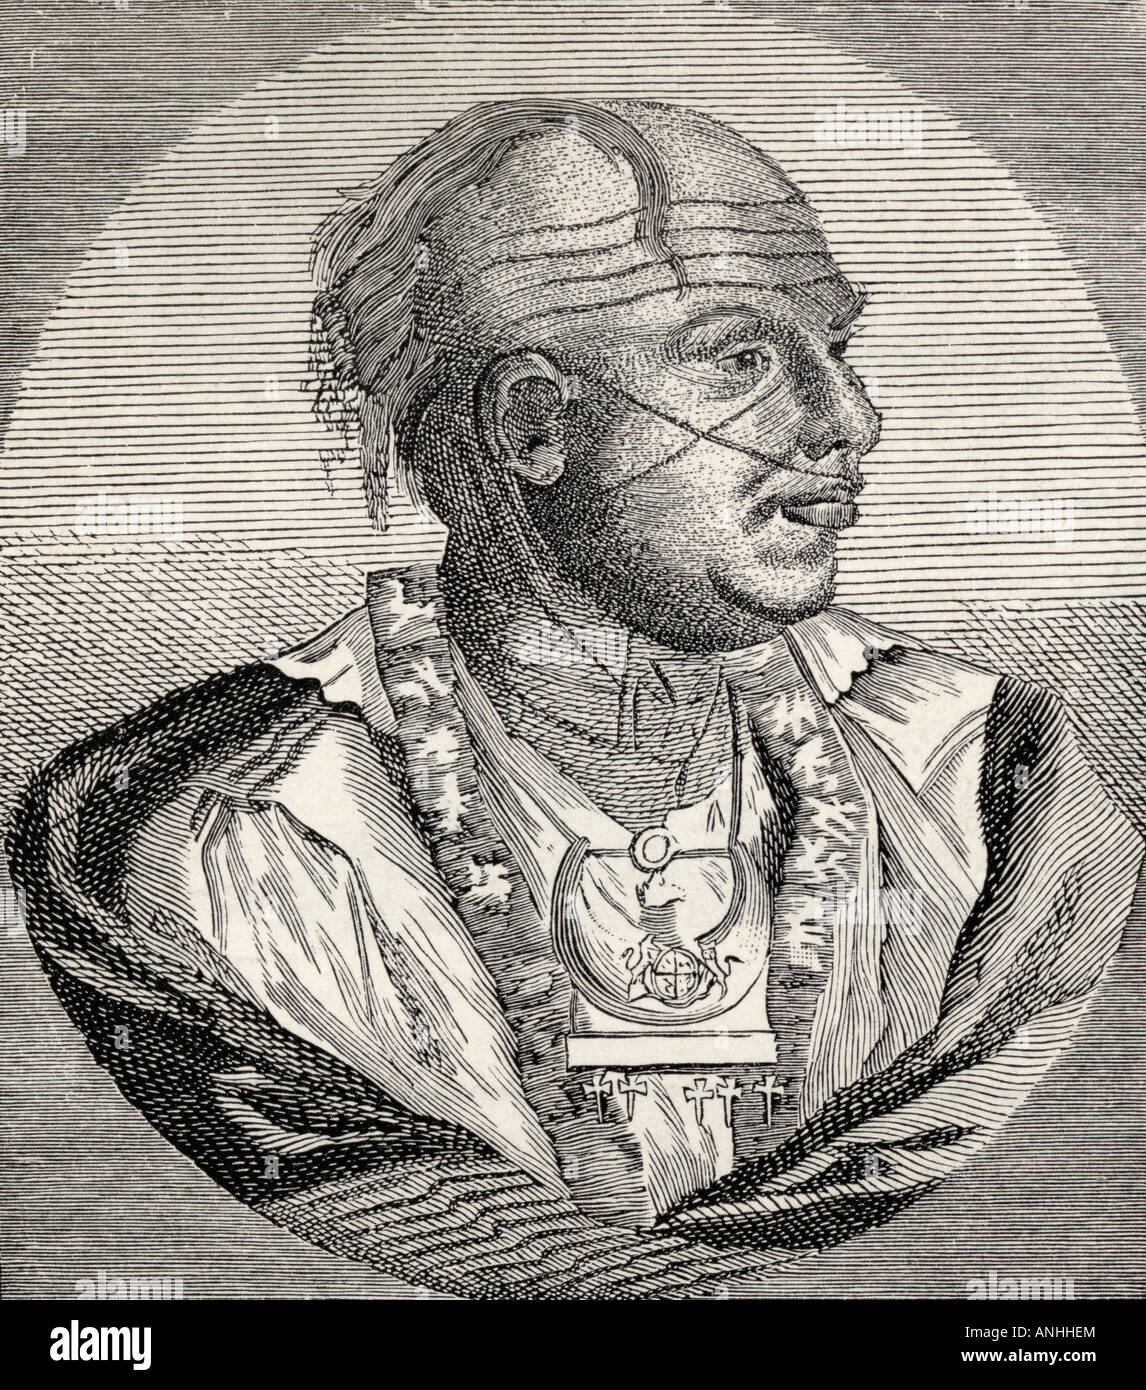 Outacite Ostenaco, c.1703- c.1780.  Chief of the Cherokees. Engraving from an old print. Stock Photo